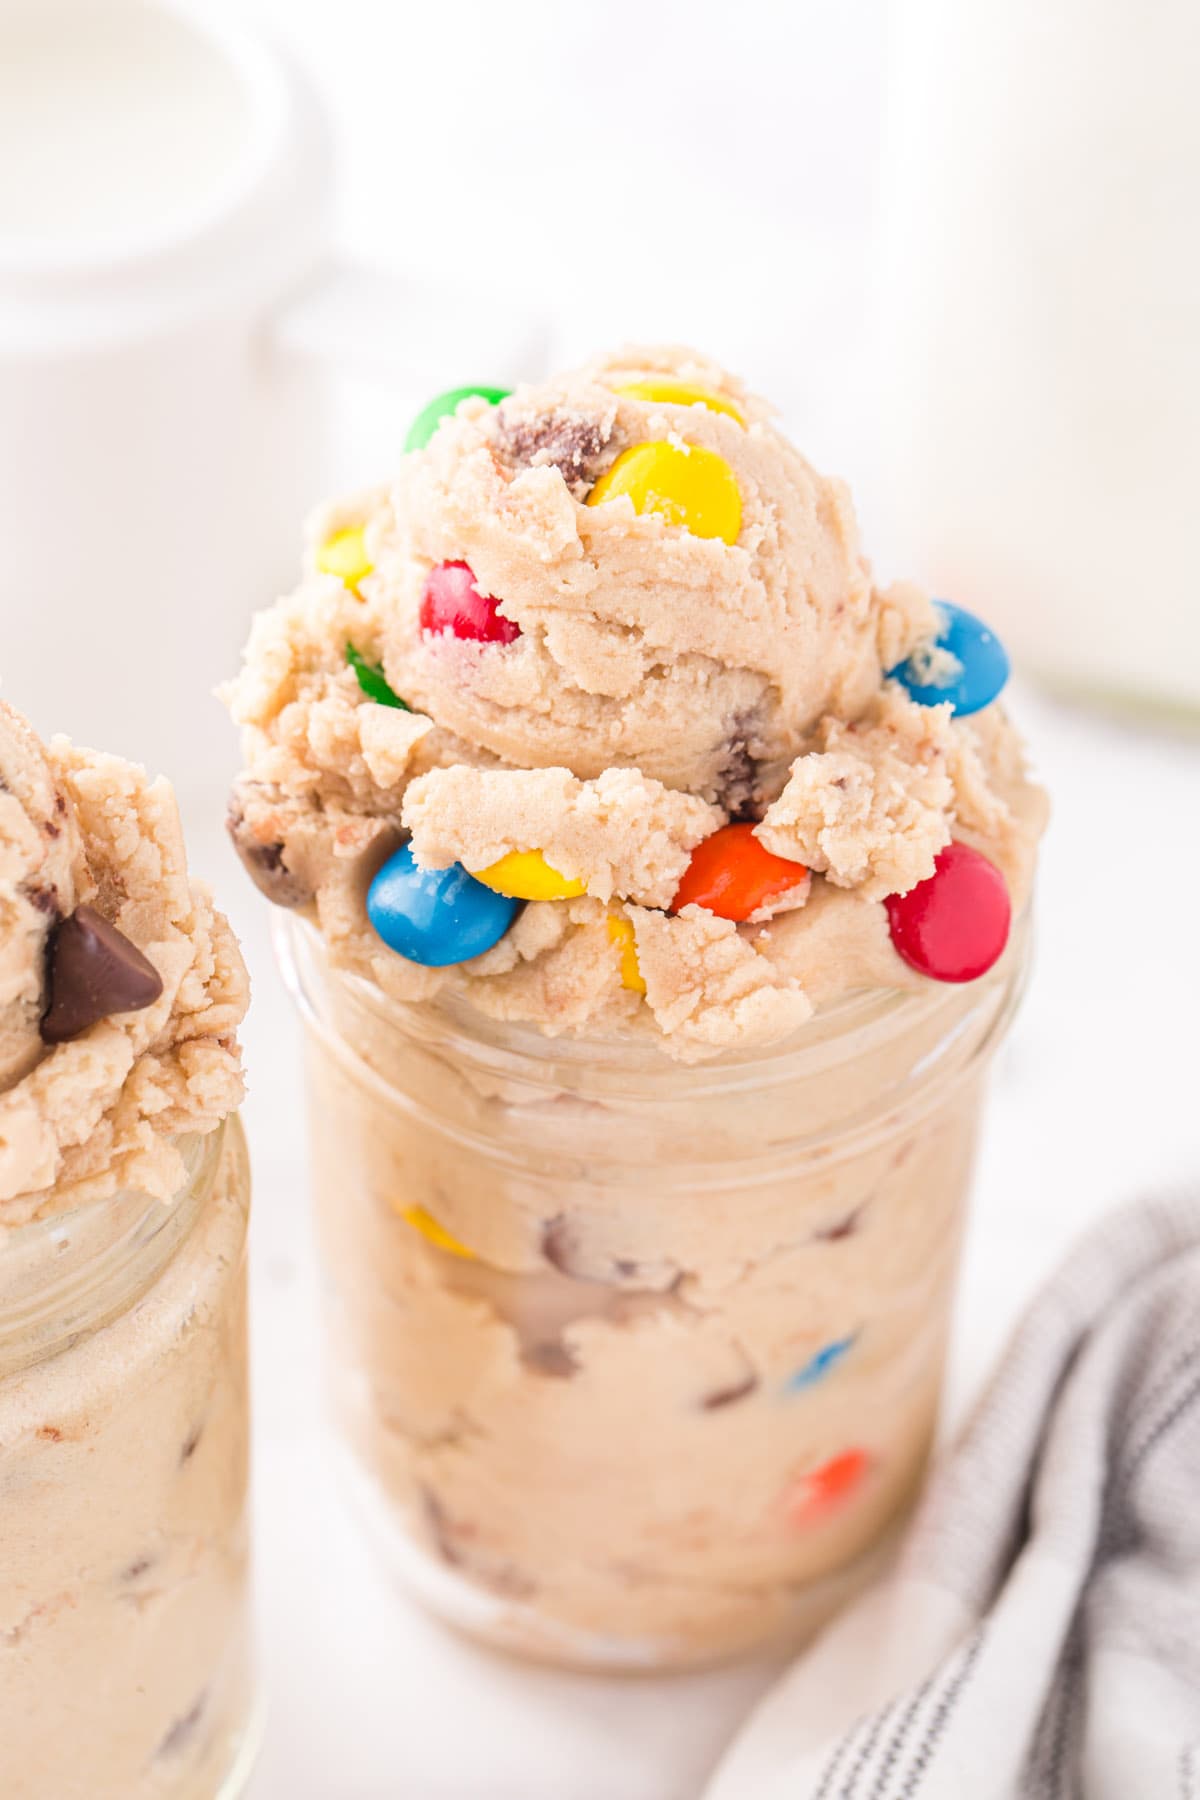 edible cookie dough with colorful m&m's